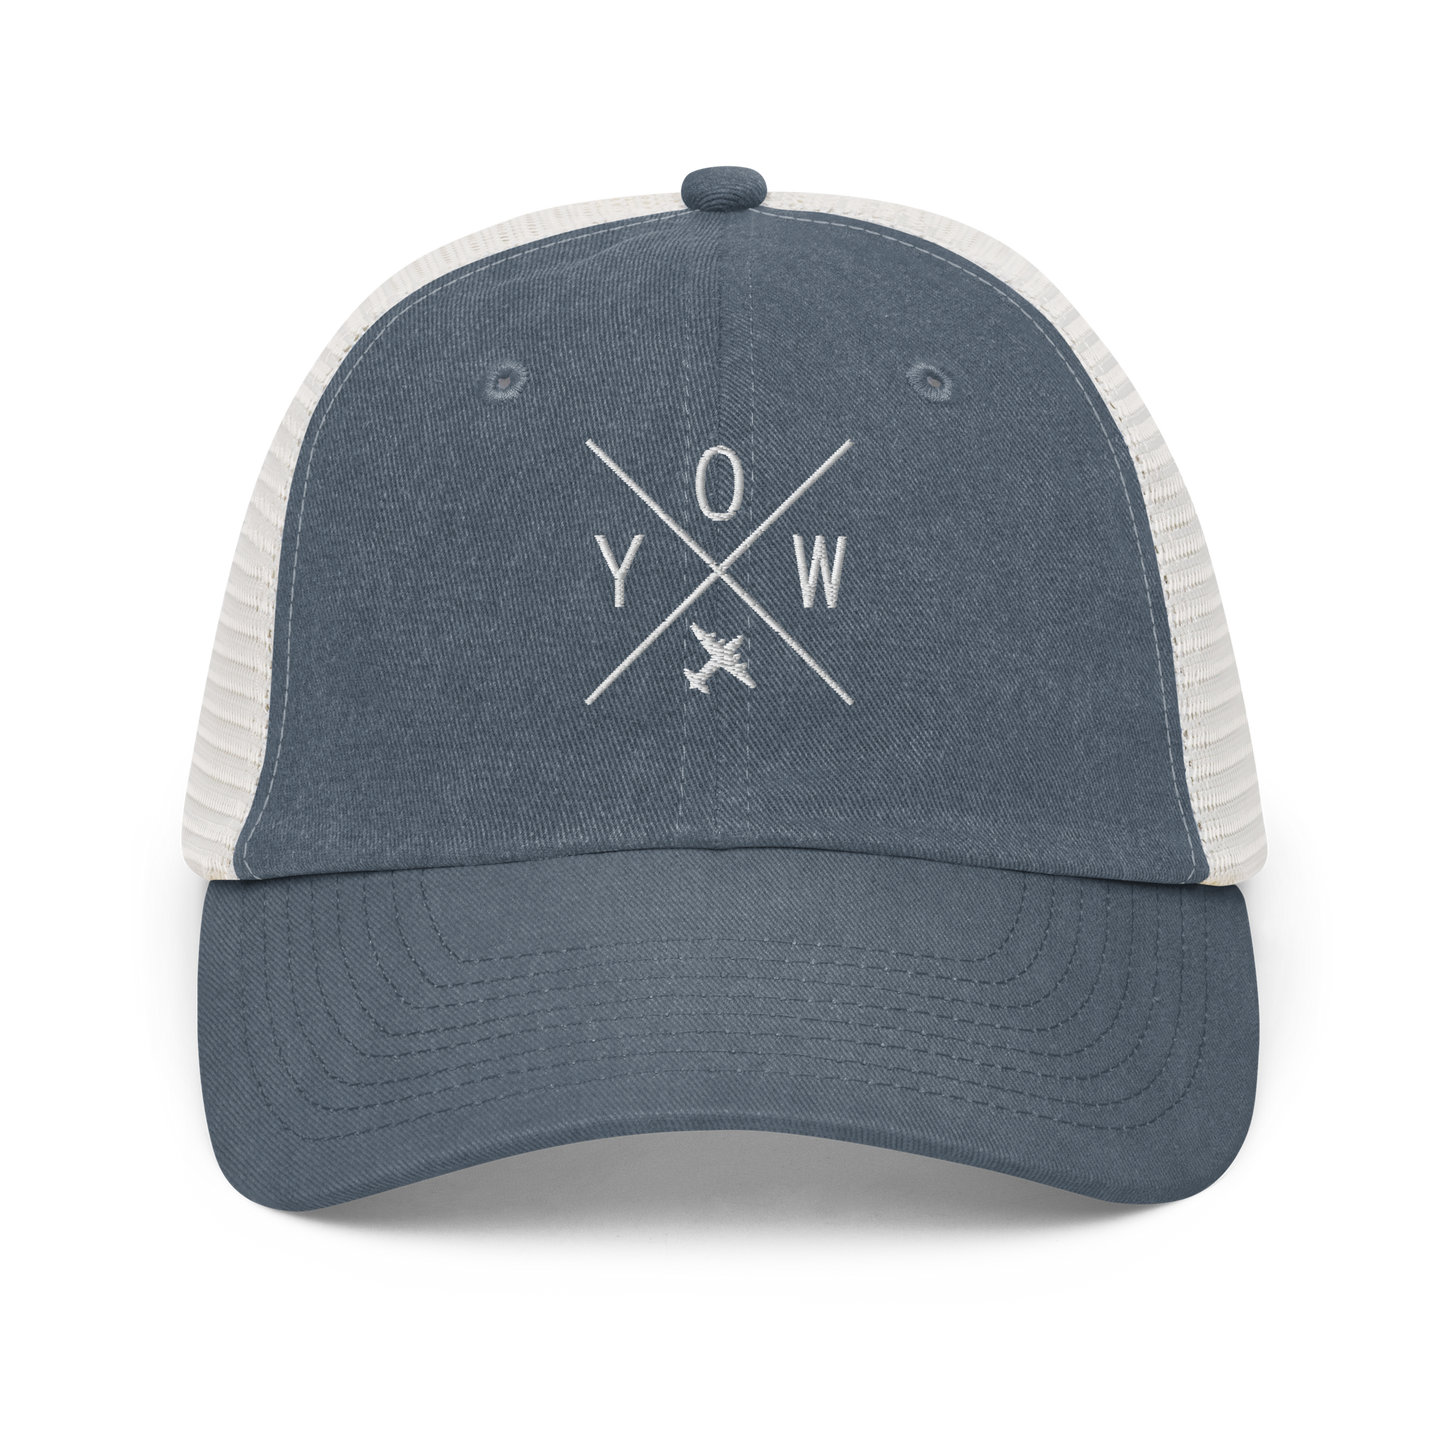 YHM Designs - YOW Ottawa Pigment-Dyed Trucker Cap - Crossed-X Design with Airport Code and Vintage Propliner - White Embroidery - Image 06